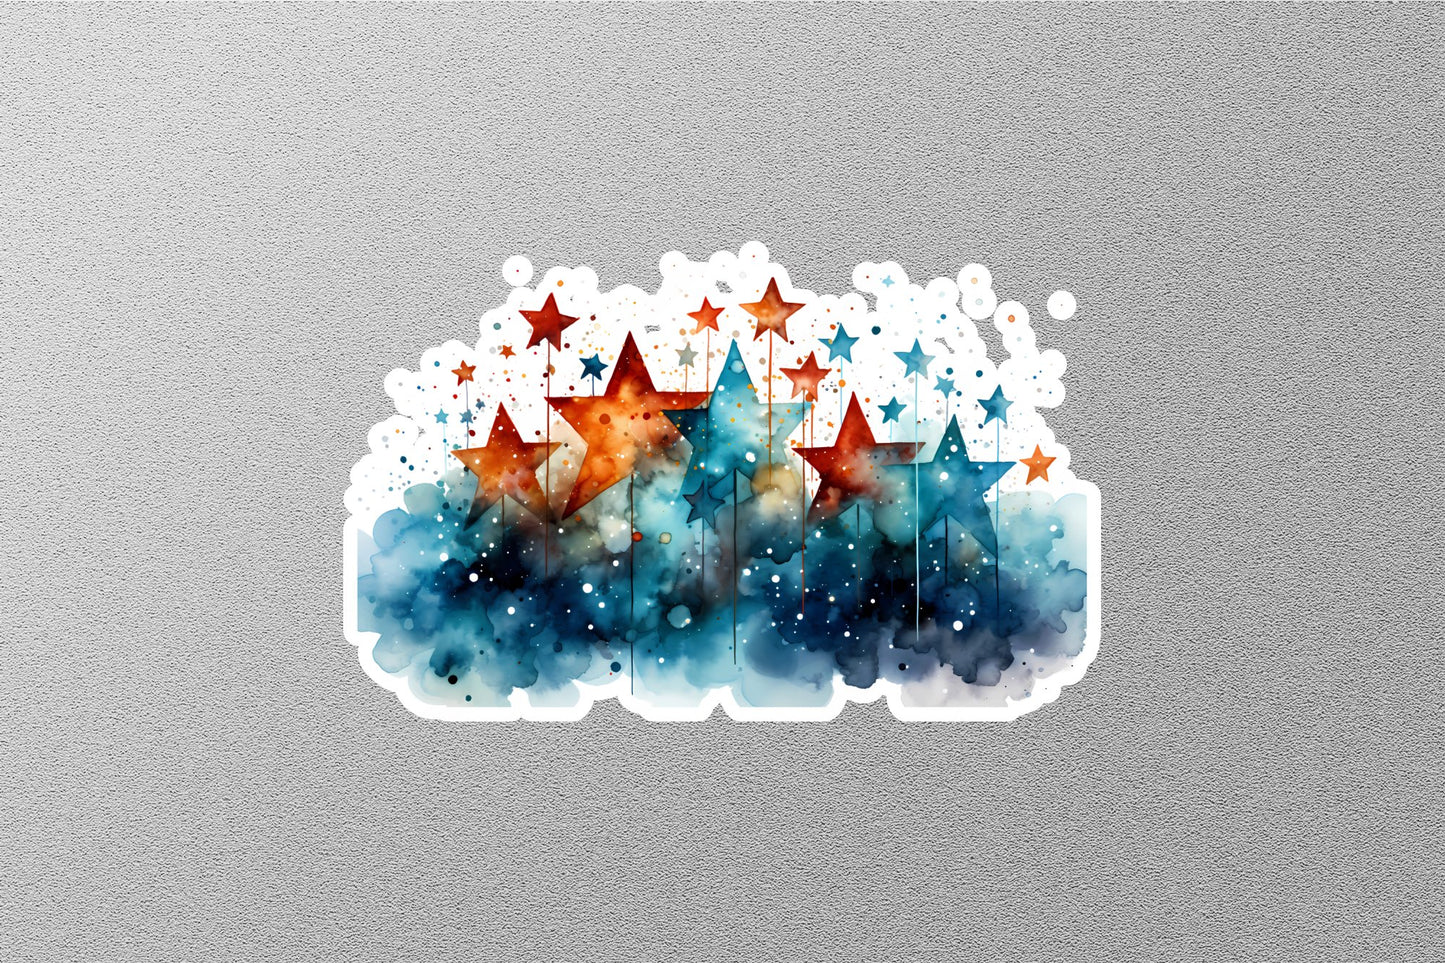 USA 4th July Independence Day Sticker